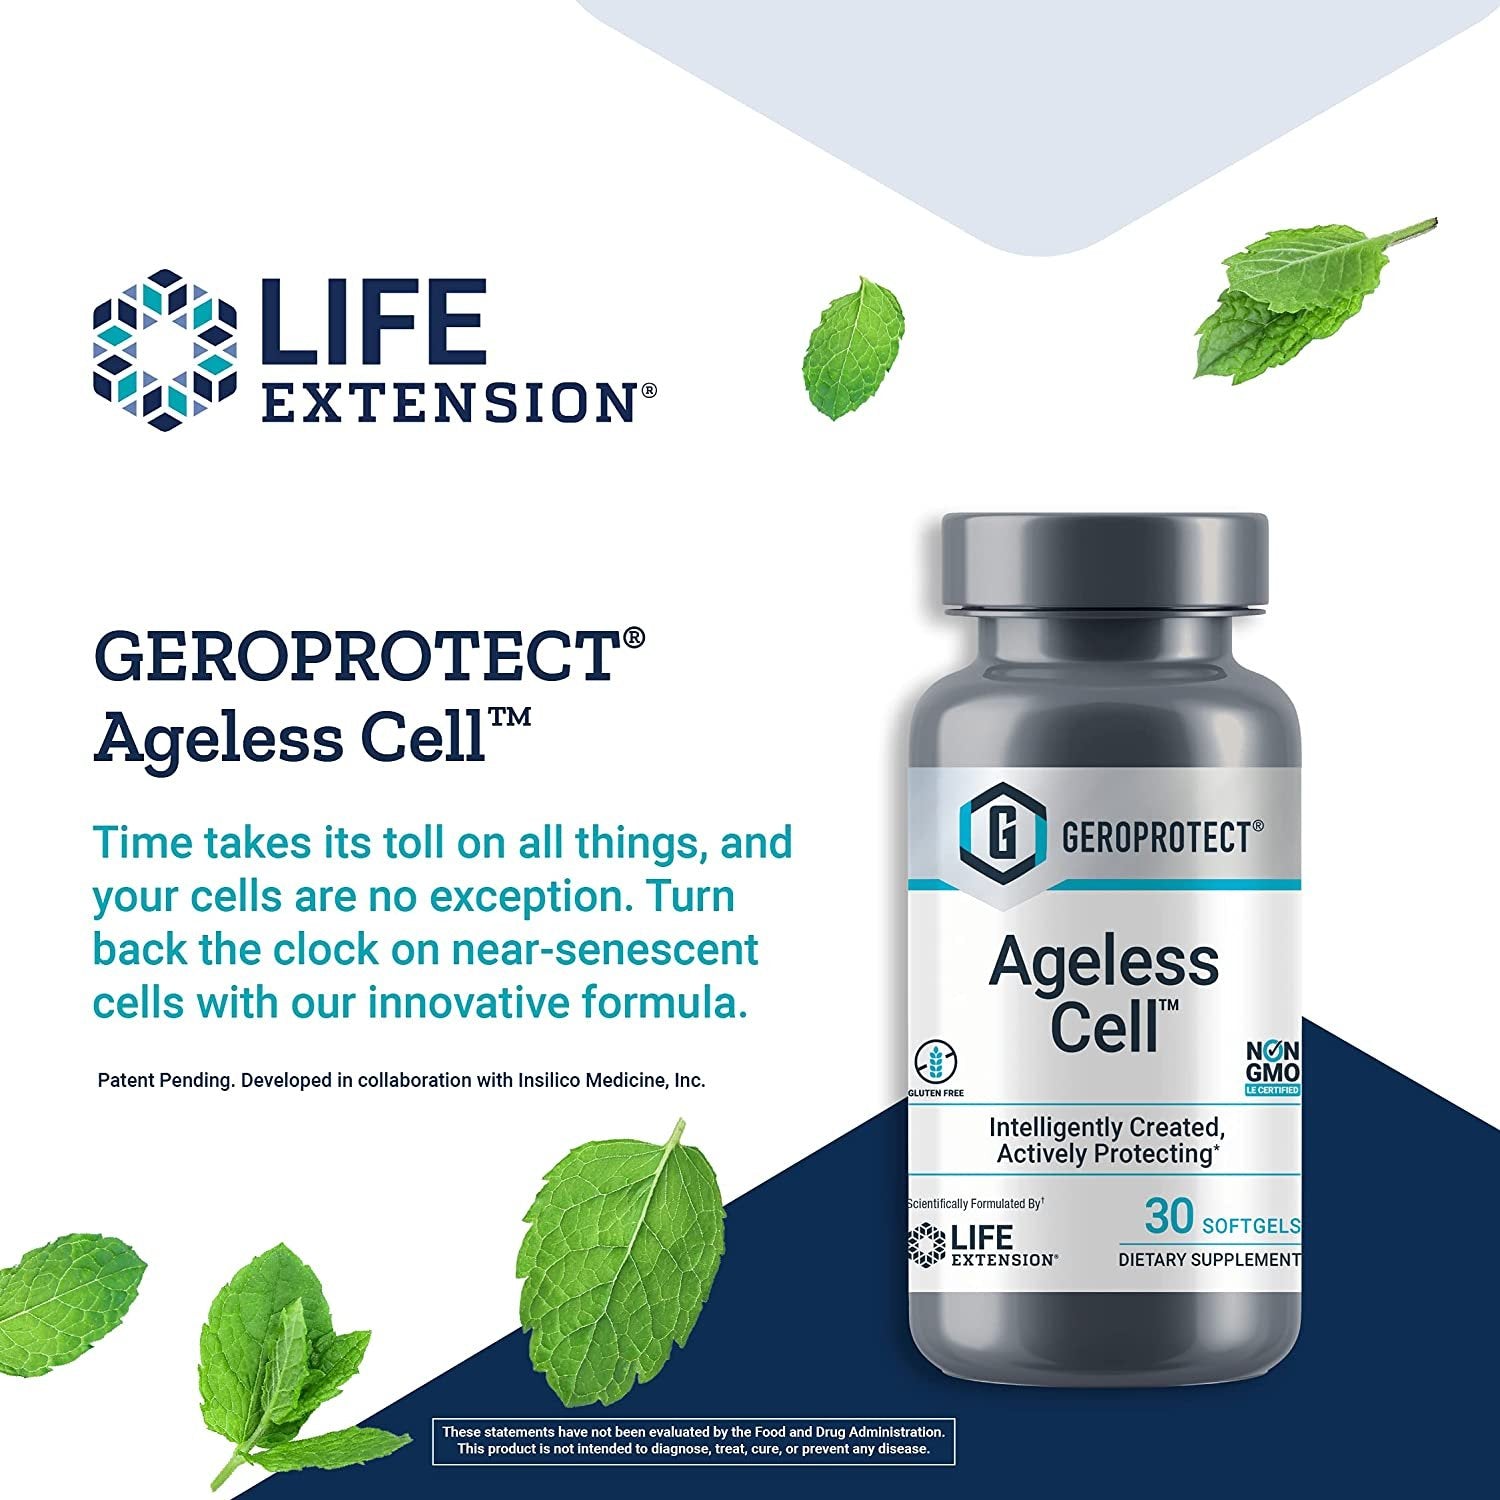 Life Extension GEROPROTECT Ageless Cell – Anti-aging Cellular Rejuvenation & Energy, Promotes Youthful Cellular Metabolism, Support Organ Health - Gluten-Free, Non-GMO - 30 Softgels